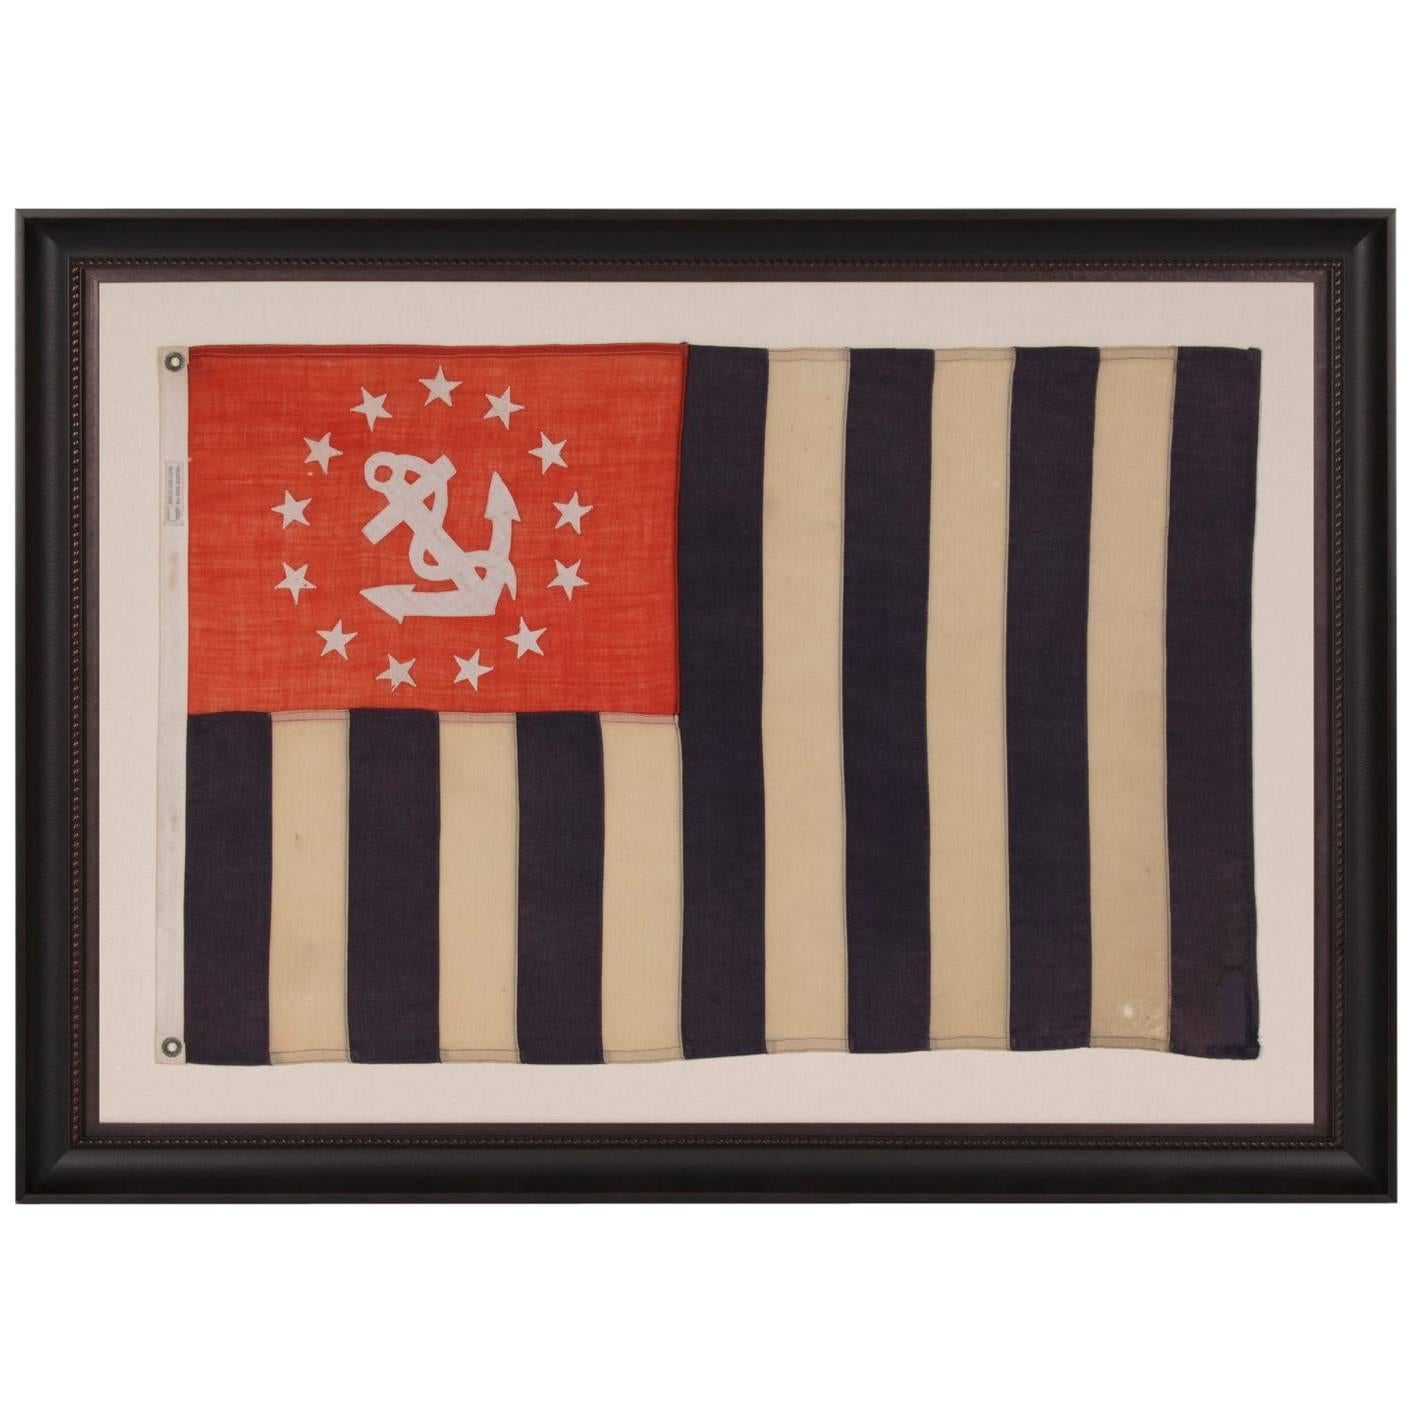 Power Squadrons Ensign, Made by Annin in New York City